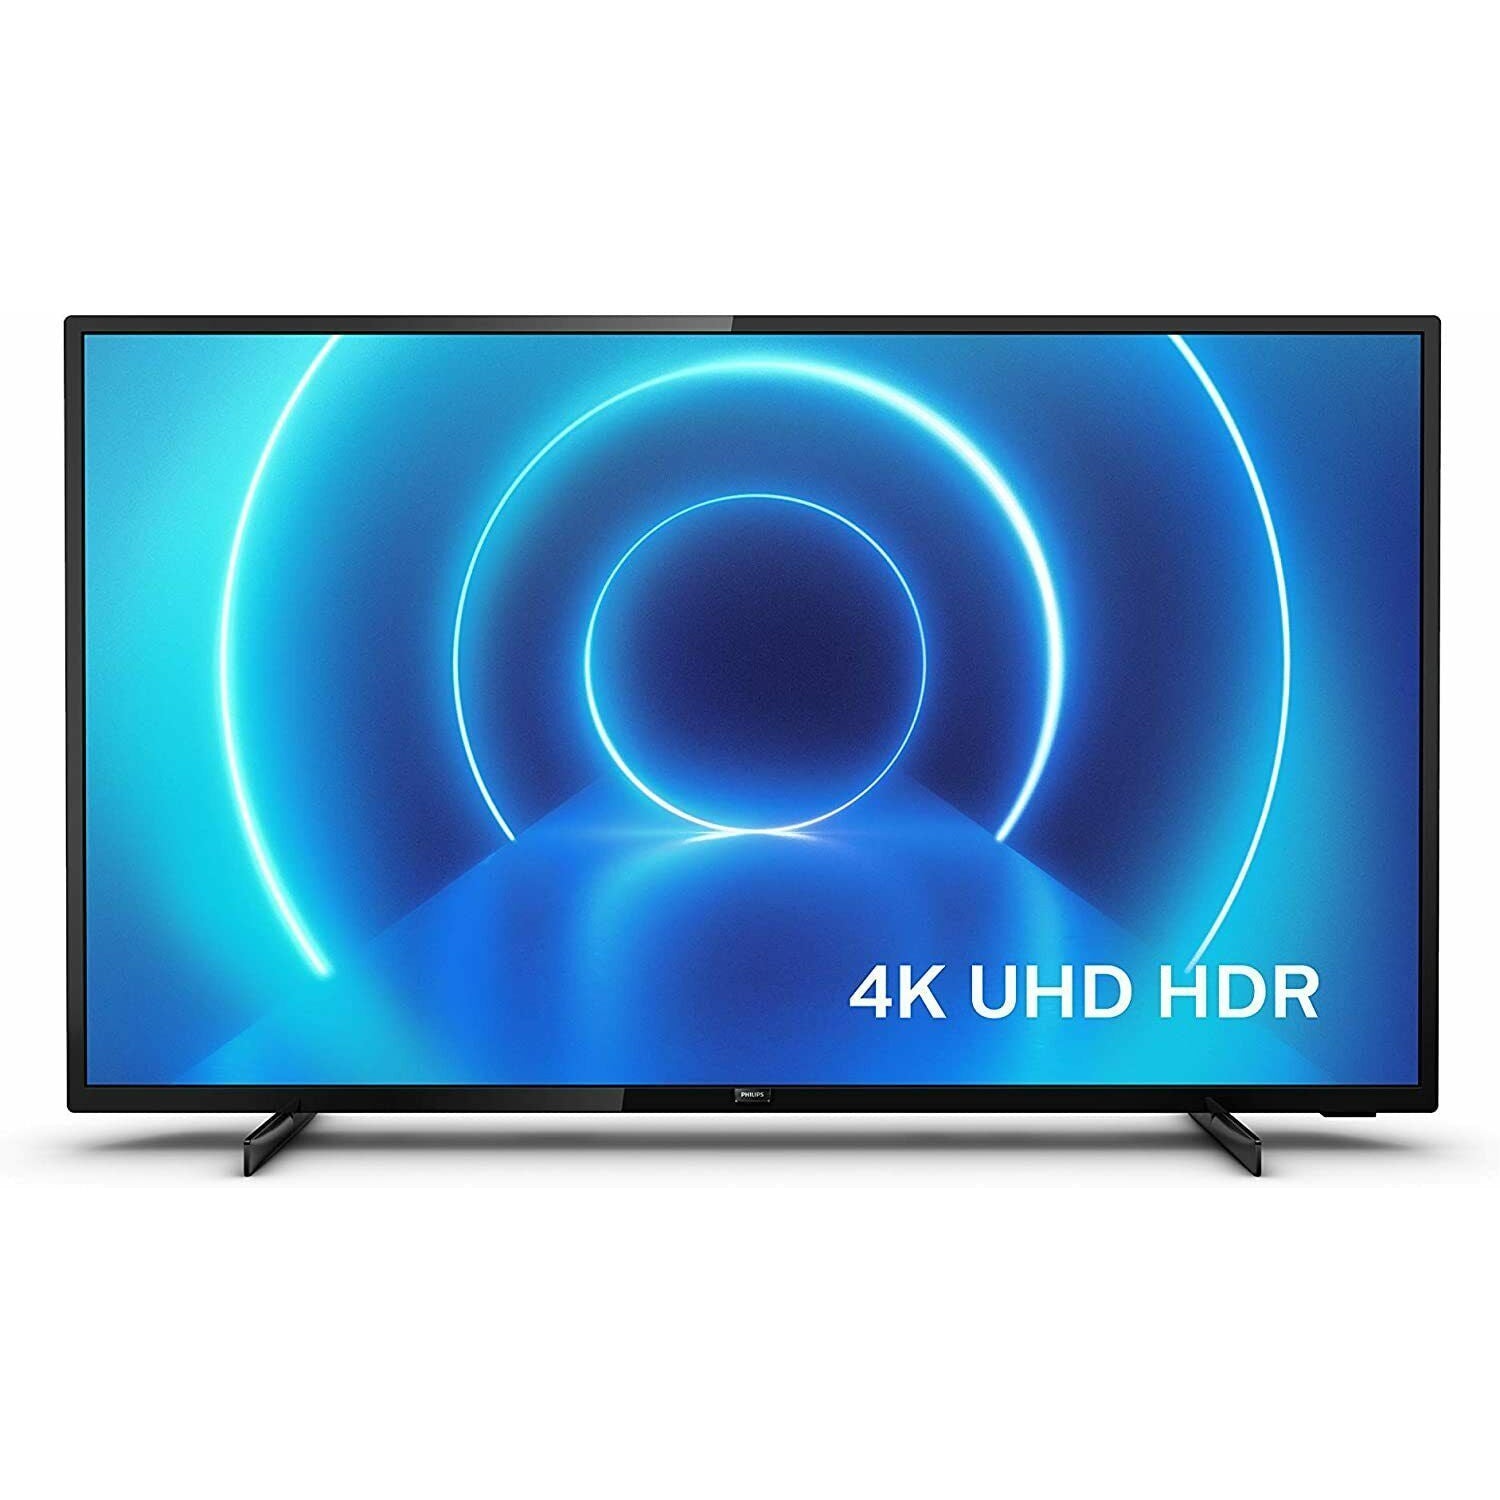 Refurbished Philips 50 Inch 50PUS7505 4K Ultra HD LED TV with HDR 2020 Model